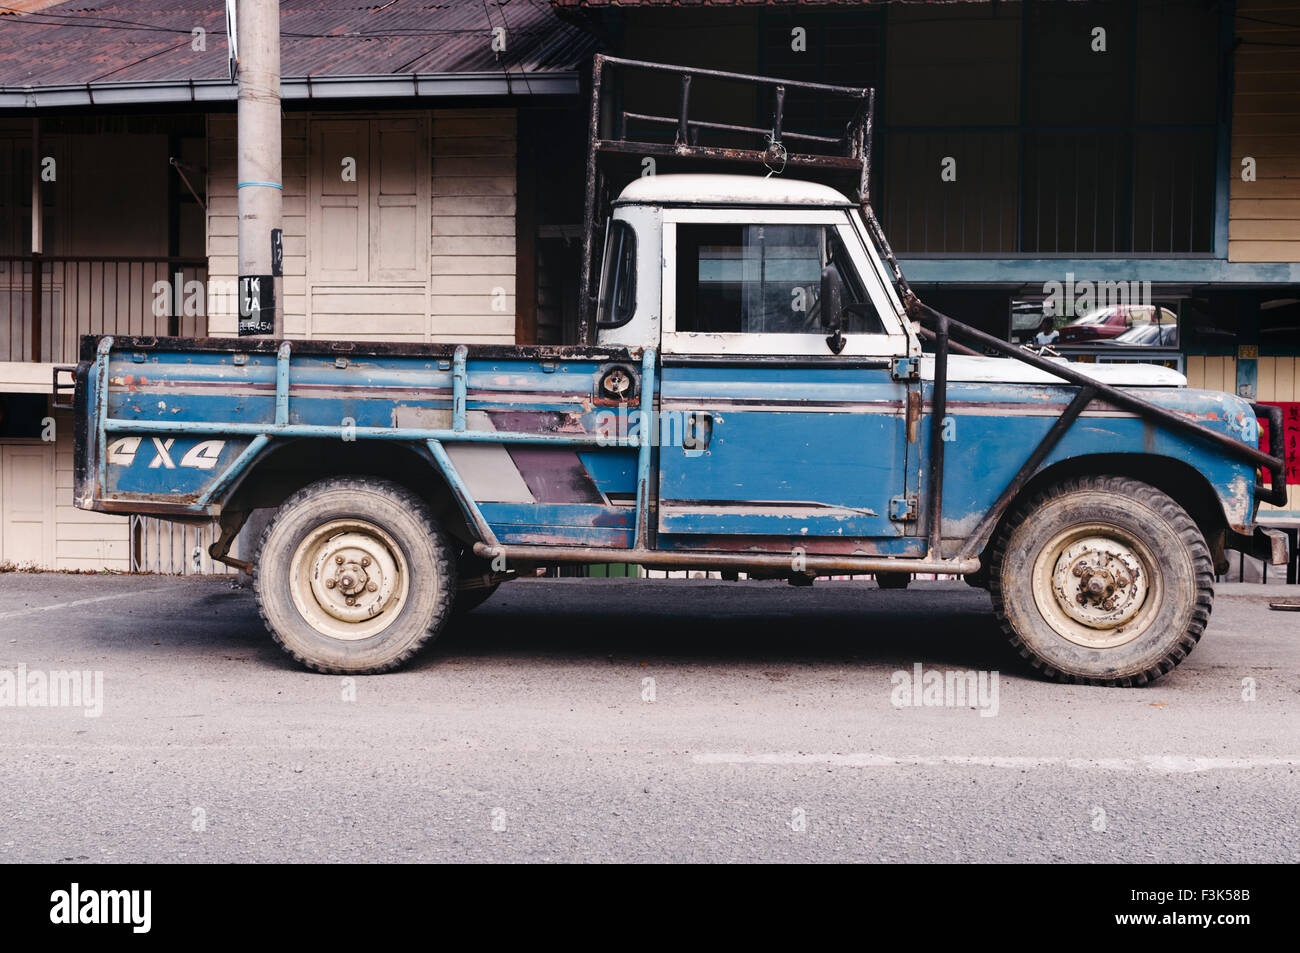 Cameron Highlands, Malaysia - there are estimated to be 7000 old Land Rovers in the area, a legacy of the British era. Stock Photo